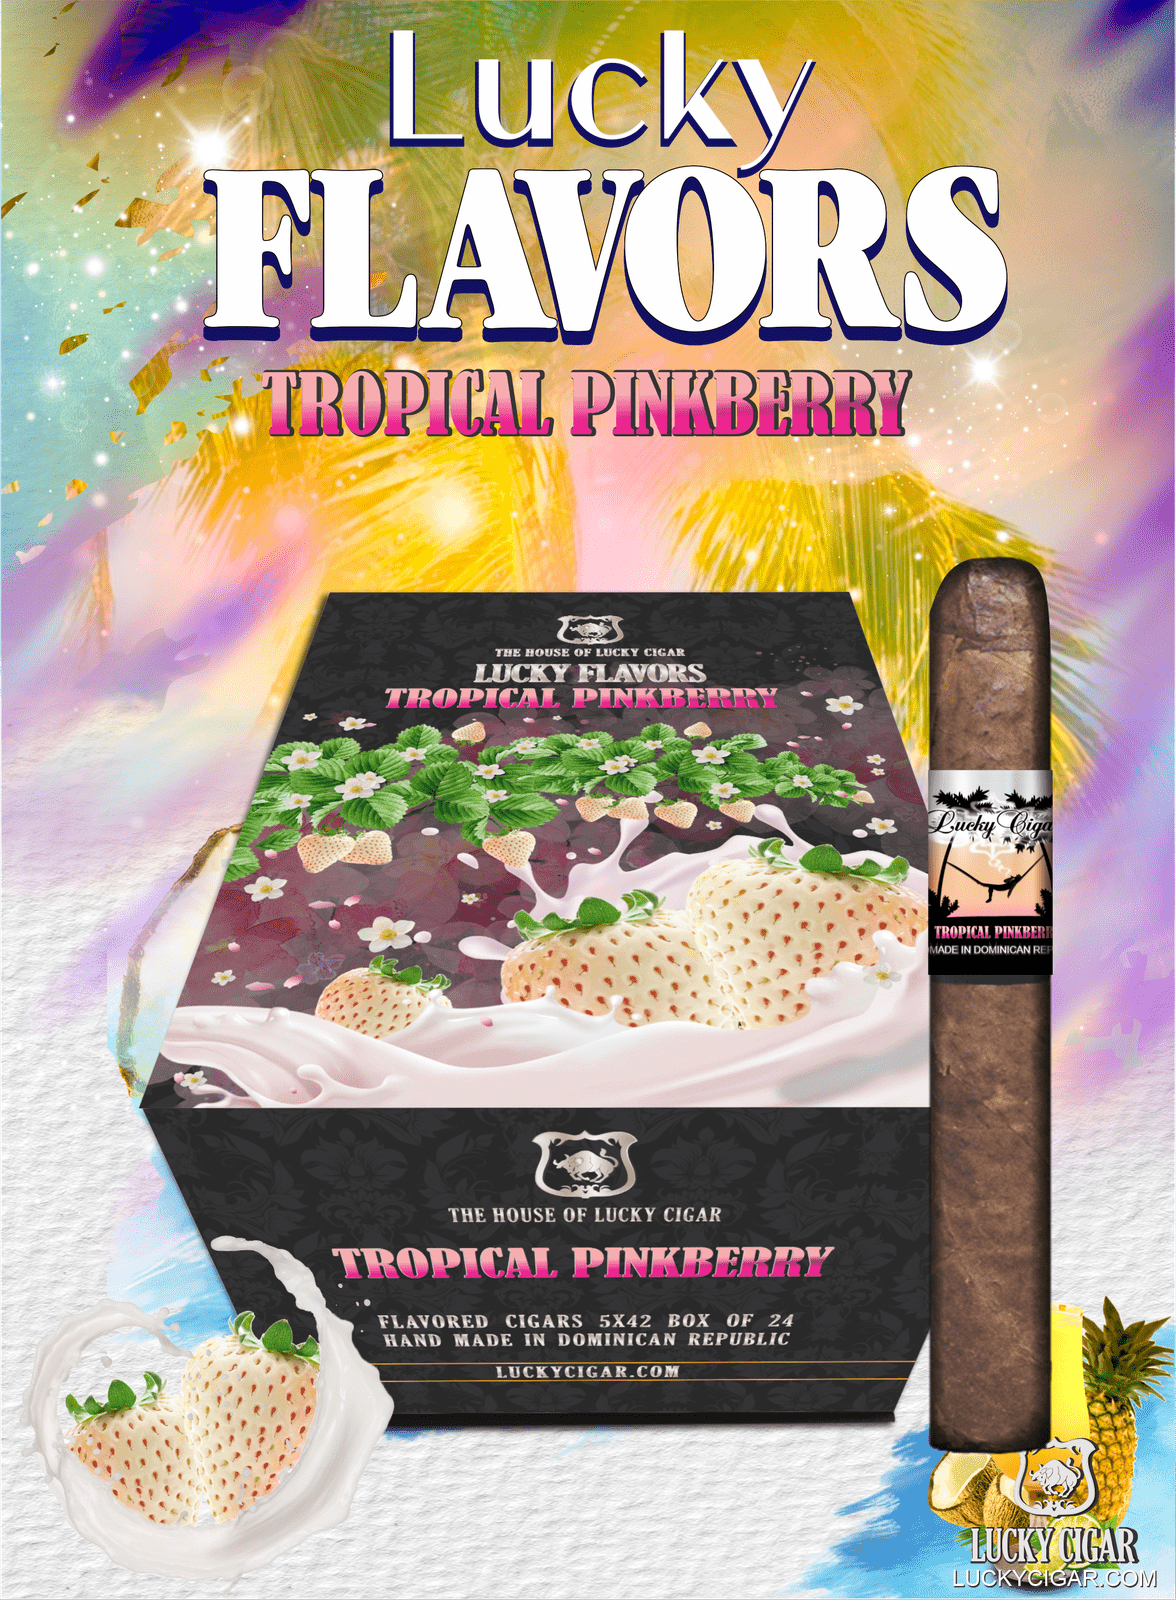 Flavored Cigars: Lucky Flavors Tropical Pinkberry  5x42 Box of 24